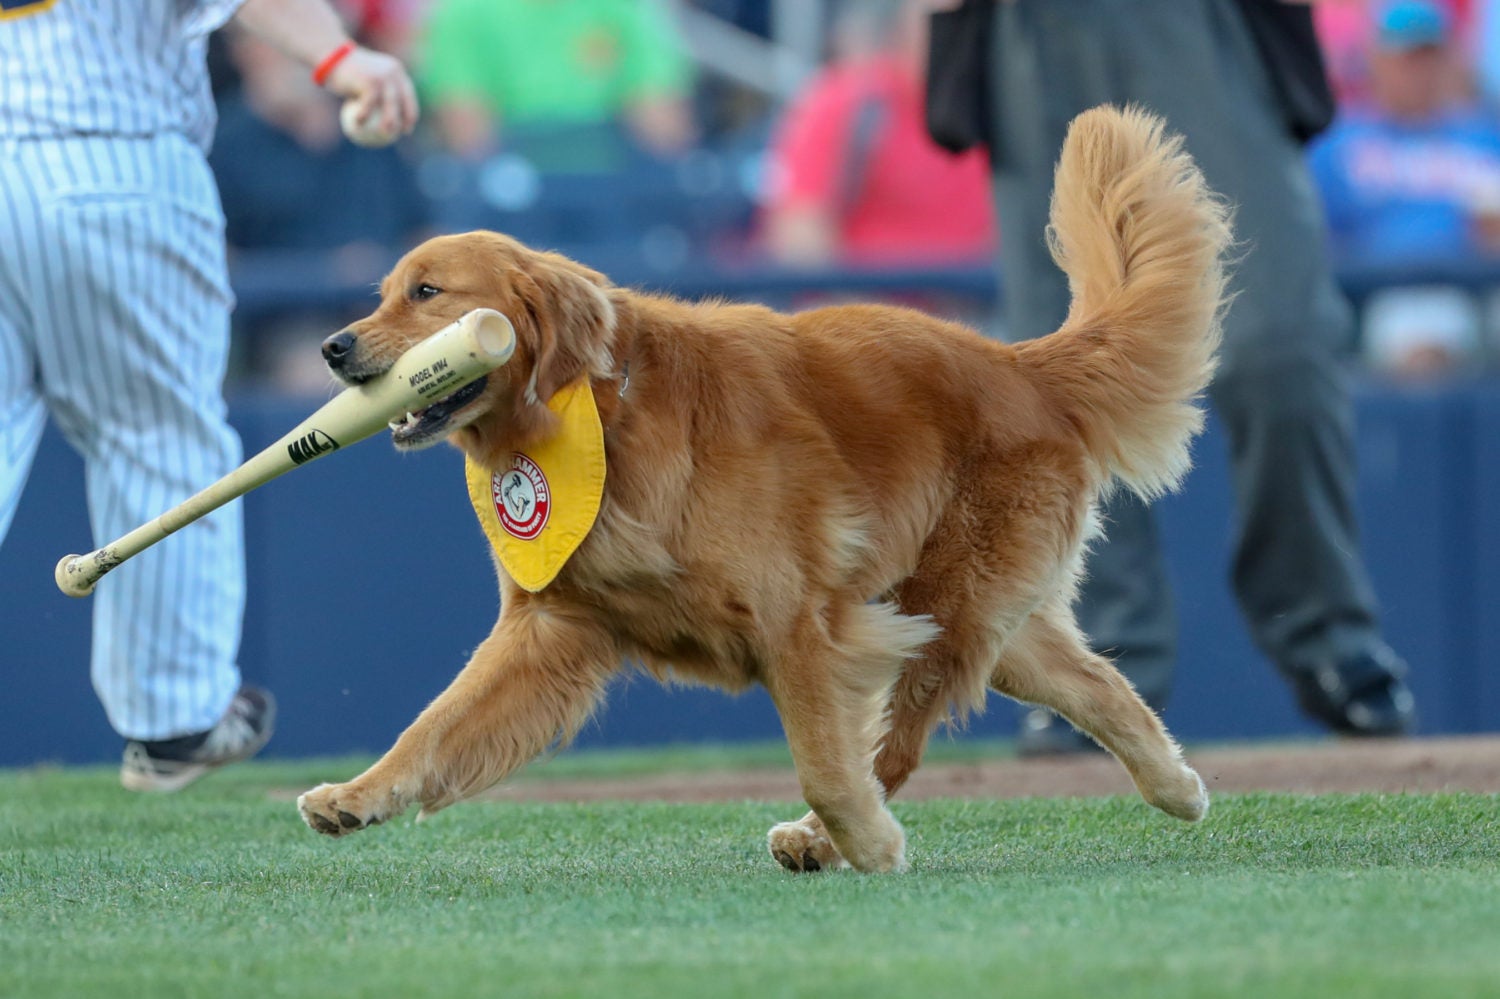 Photos of dogs wearing baseball gear on National Dog Day